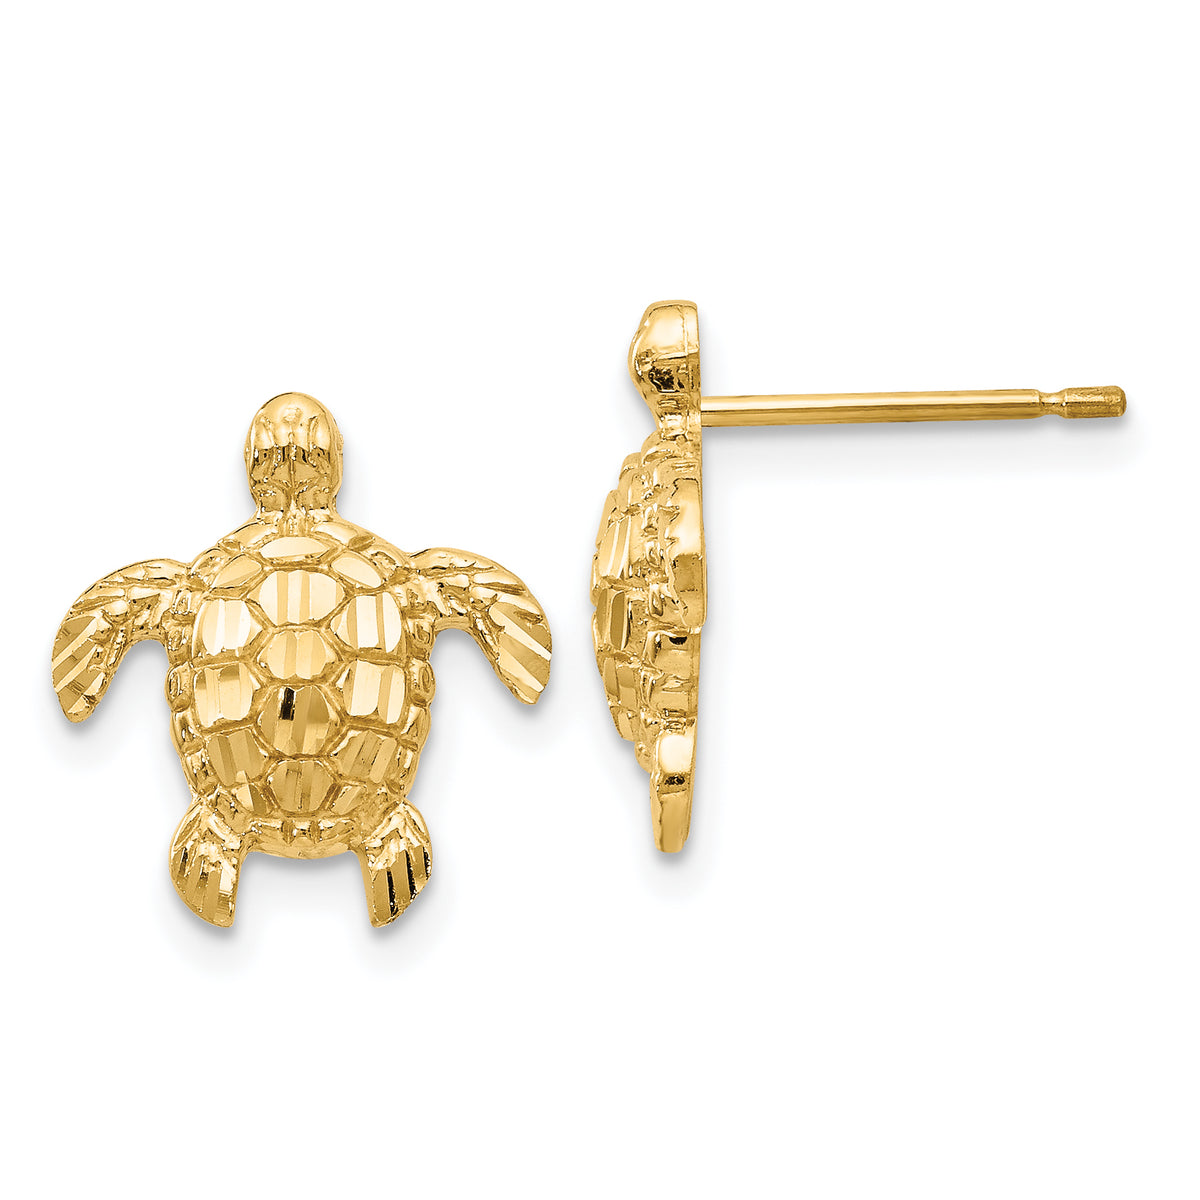 10k Gold Polished & Textured Sea Turtles Post Earrings